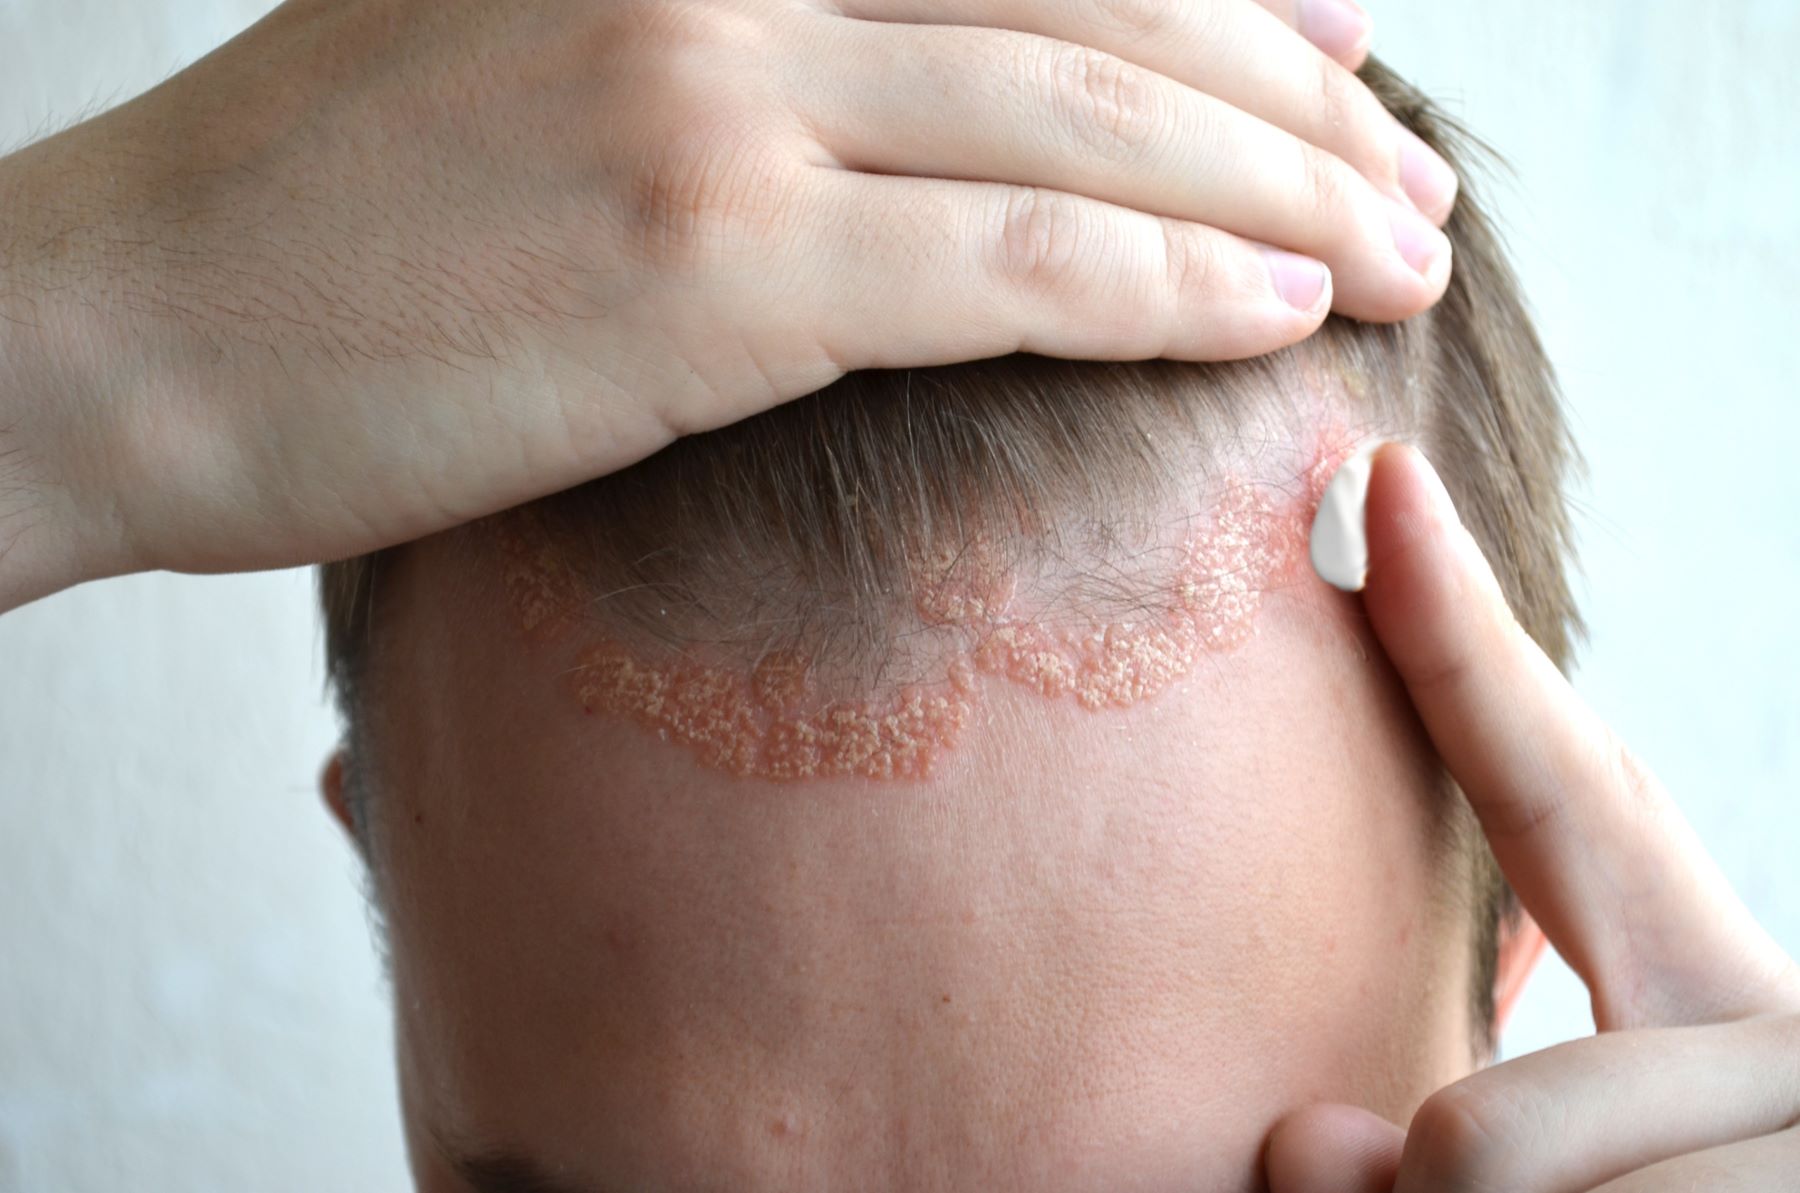 scalp psoriasis on a young person